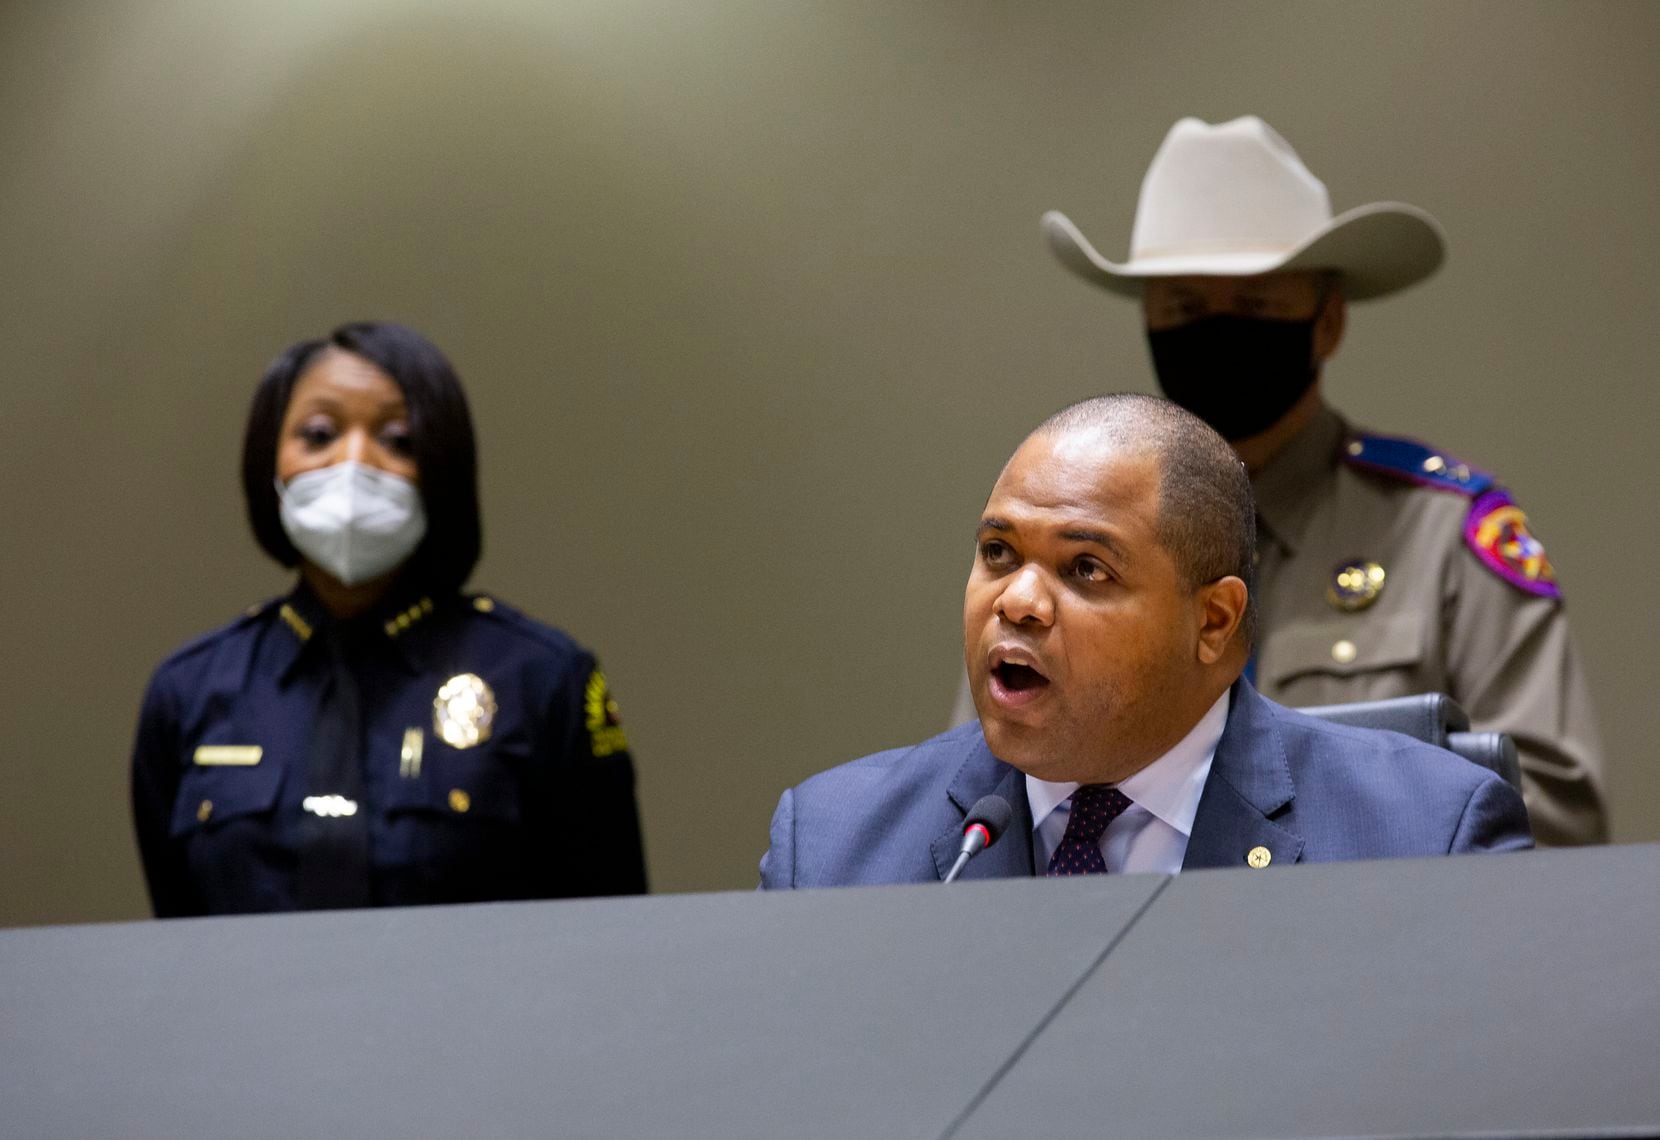 “The peaceful protesters, affected business owners and people of Dallas deserve clear and thorough answers regarding the ‘errors, miscalculations and shortcomings’ in the report” released by Dallas Police Chief U. Renee Hall (left) and the Police Department on Friday, Dallas Mayor Eric Johnson (seated) said Saturday.